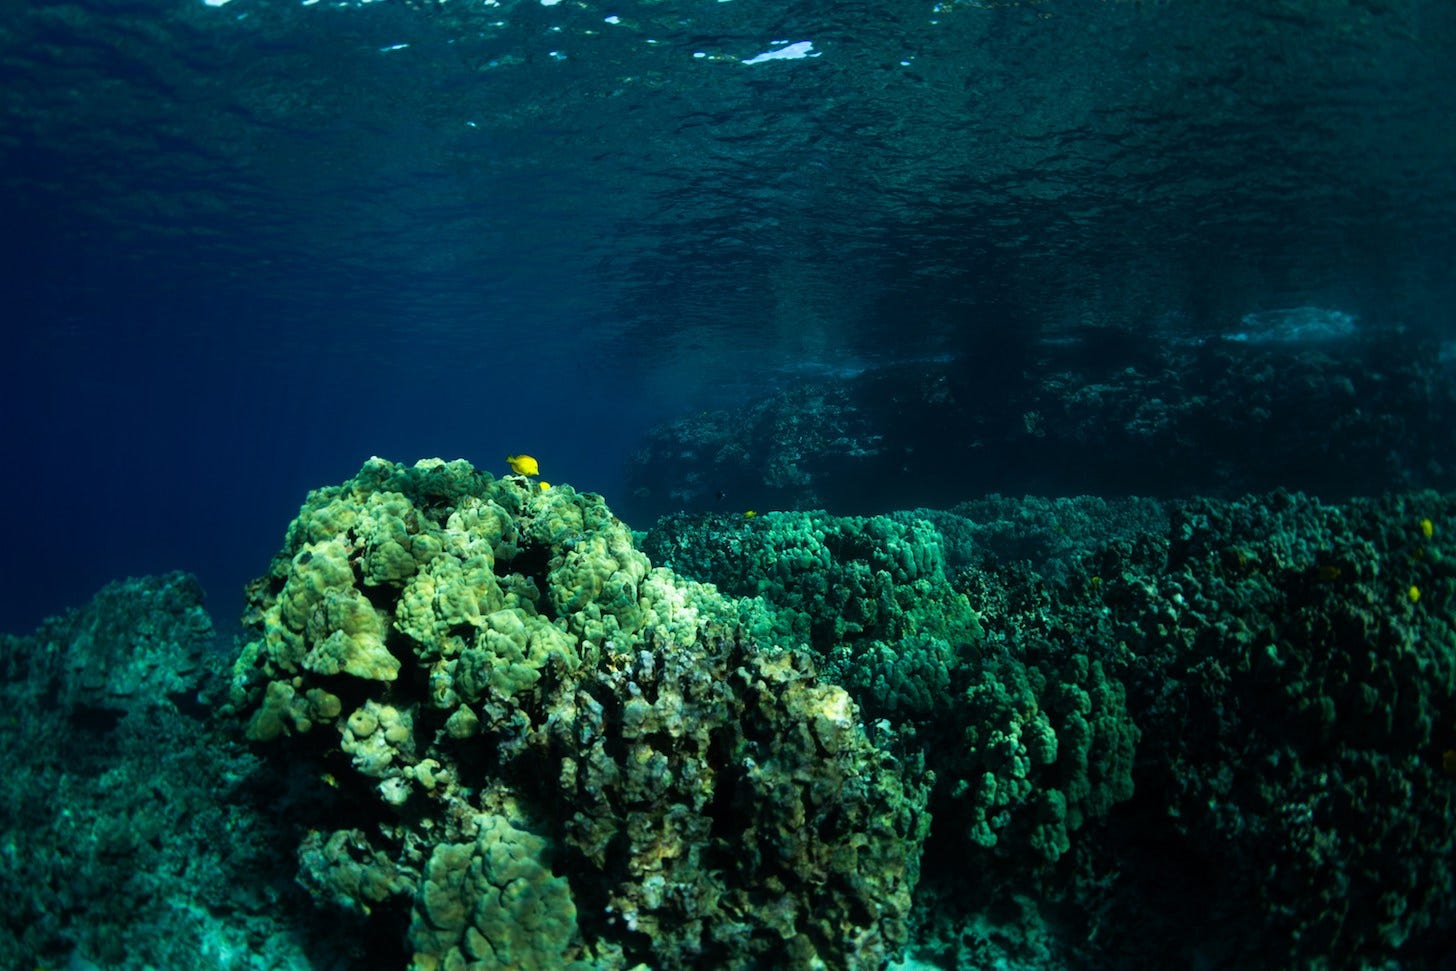 Underwater scene of mounds of corals covering a reef with the water surface visible above